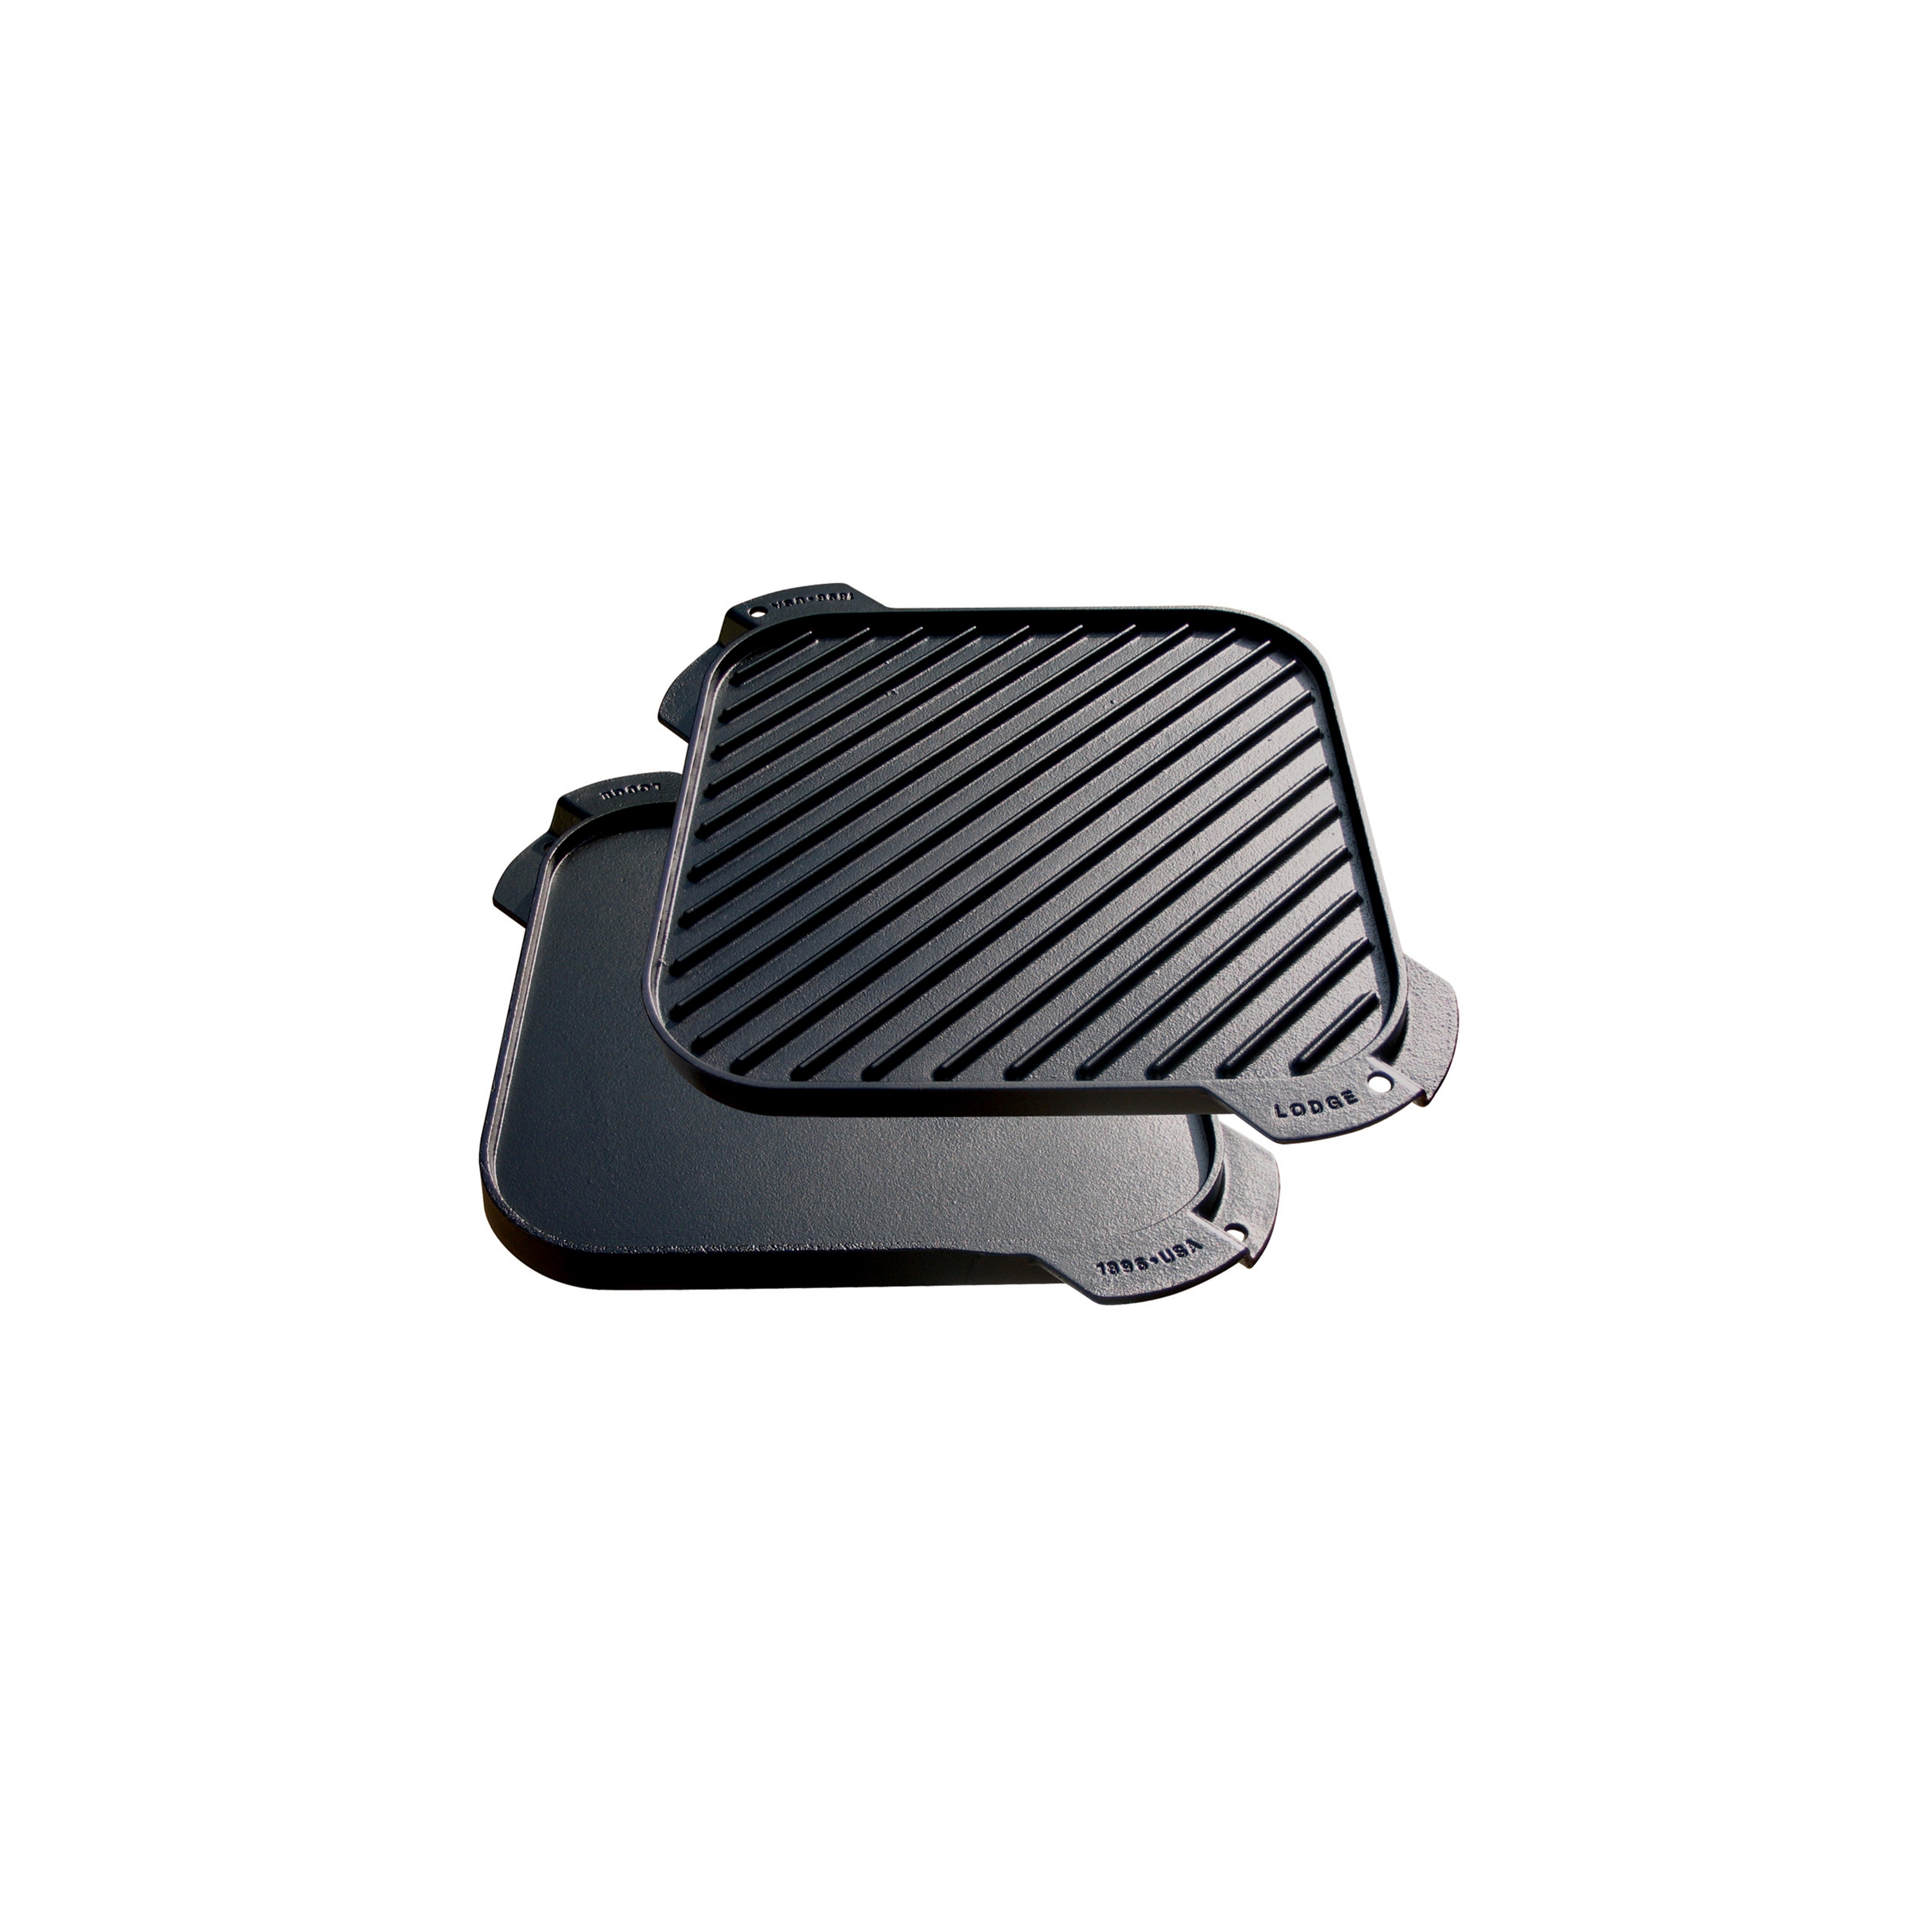 Lodge 10.5 inch Seasoned Cast Iron Reversible Grill/Griddle